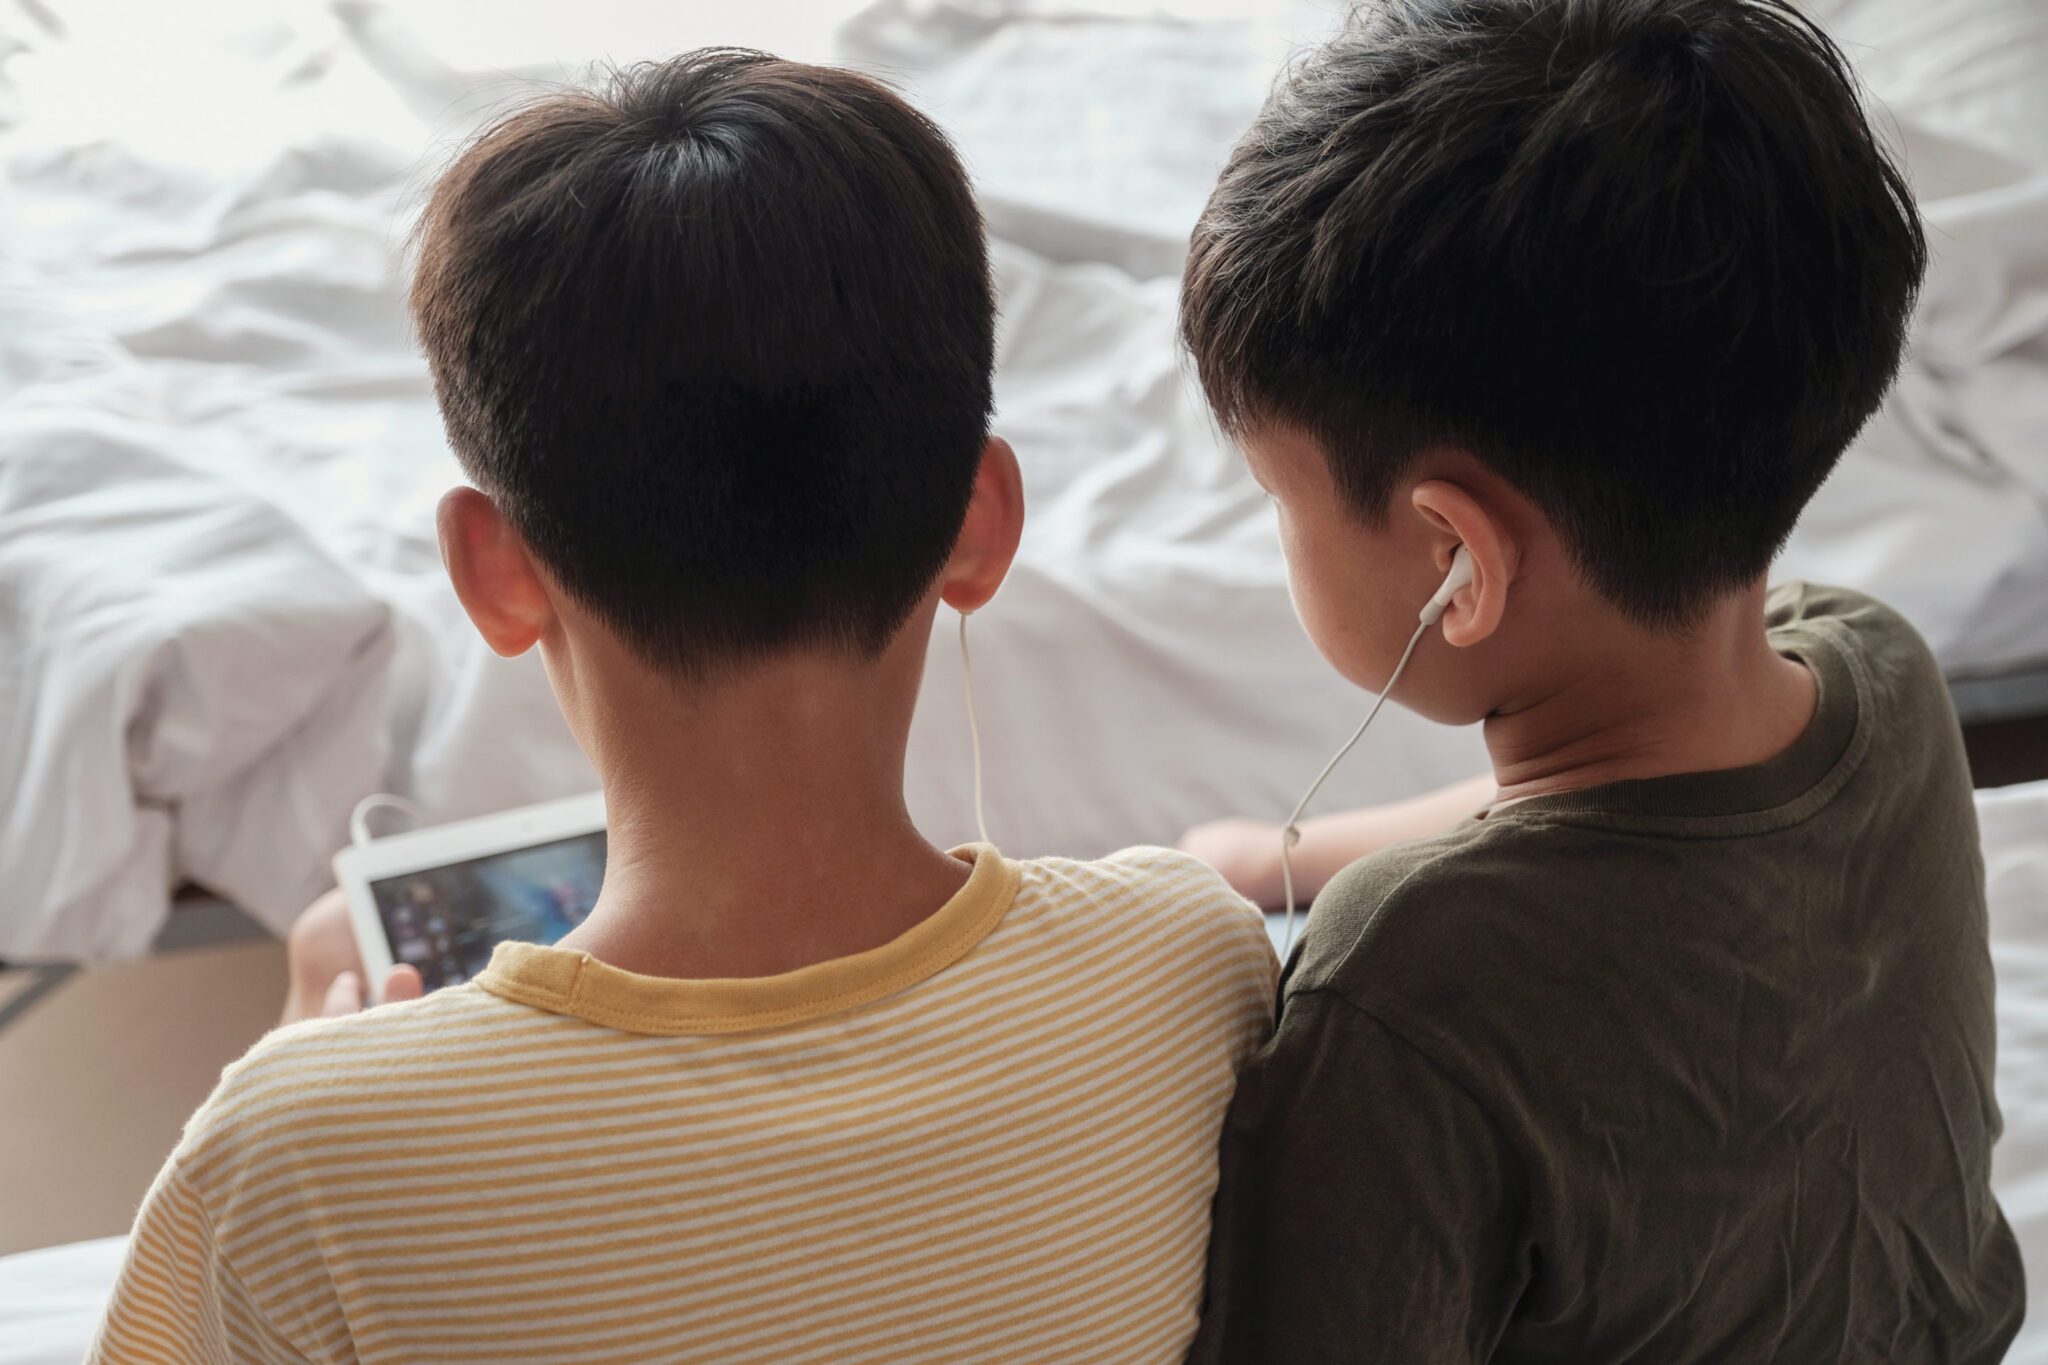 Tween boys using tablet and sharing earphones, listening to podcast, music, playing games, and using internet technology.